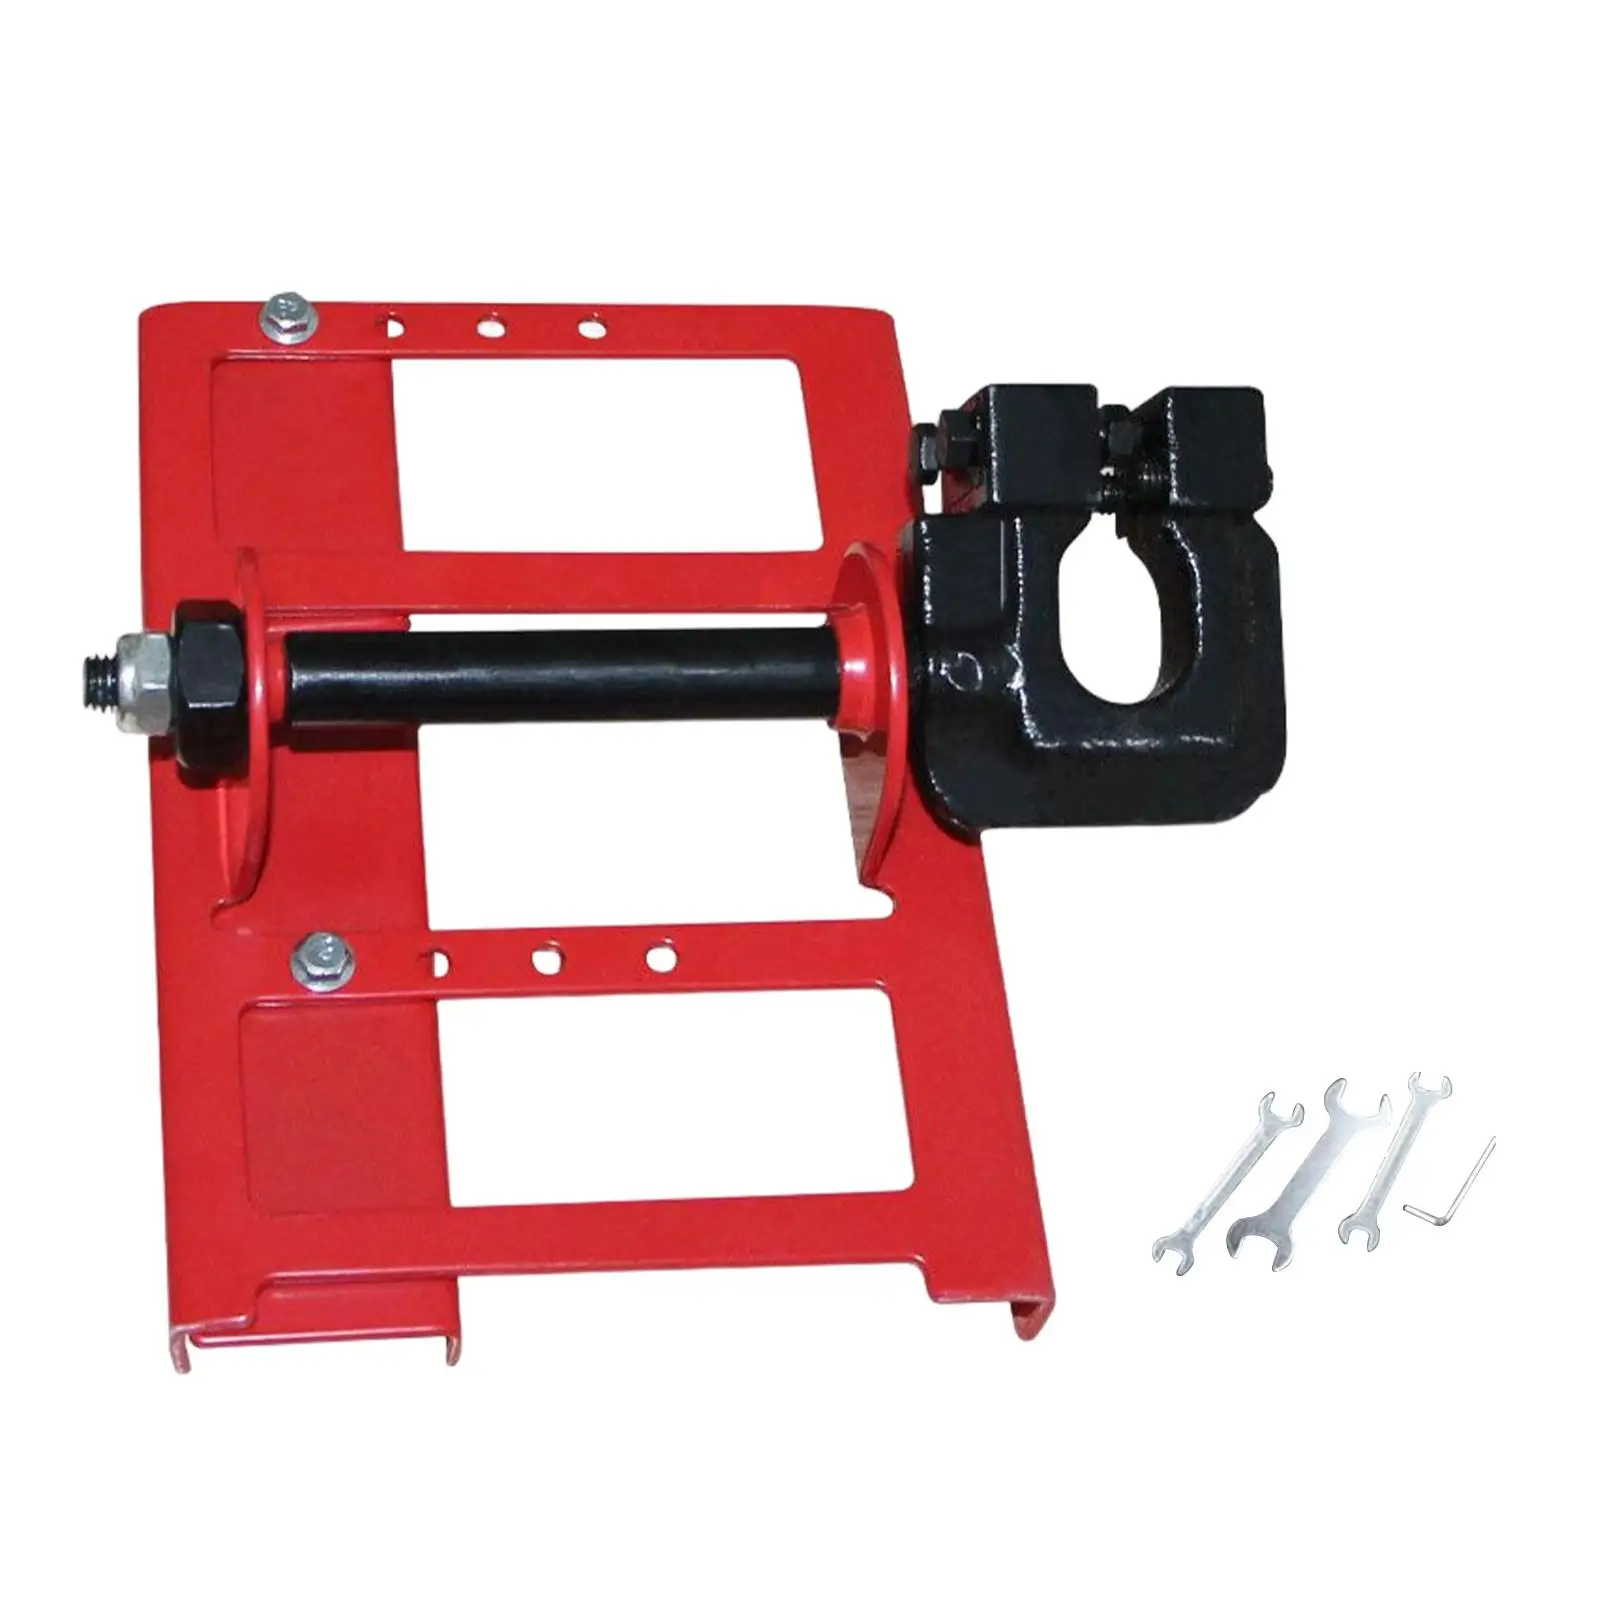 Chainsaw Portable Chainsaw Attachment Accs Milling Vertical Cutting Guide Portable Sawmill for Construction Workers